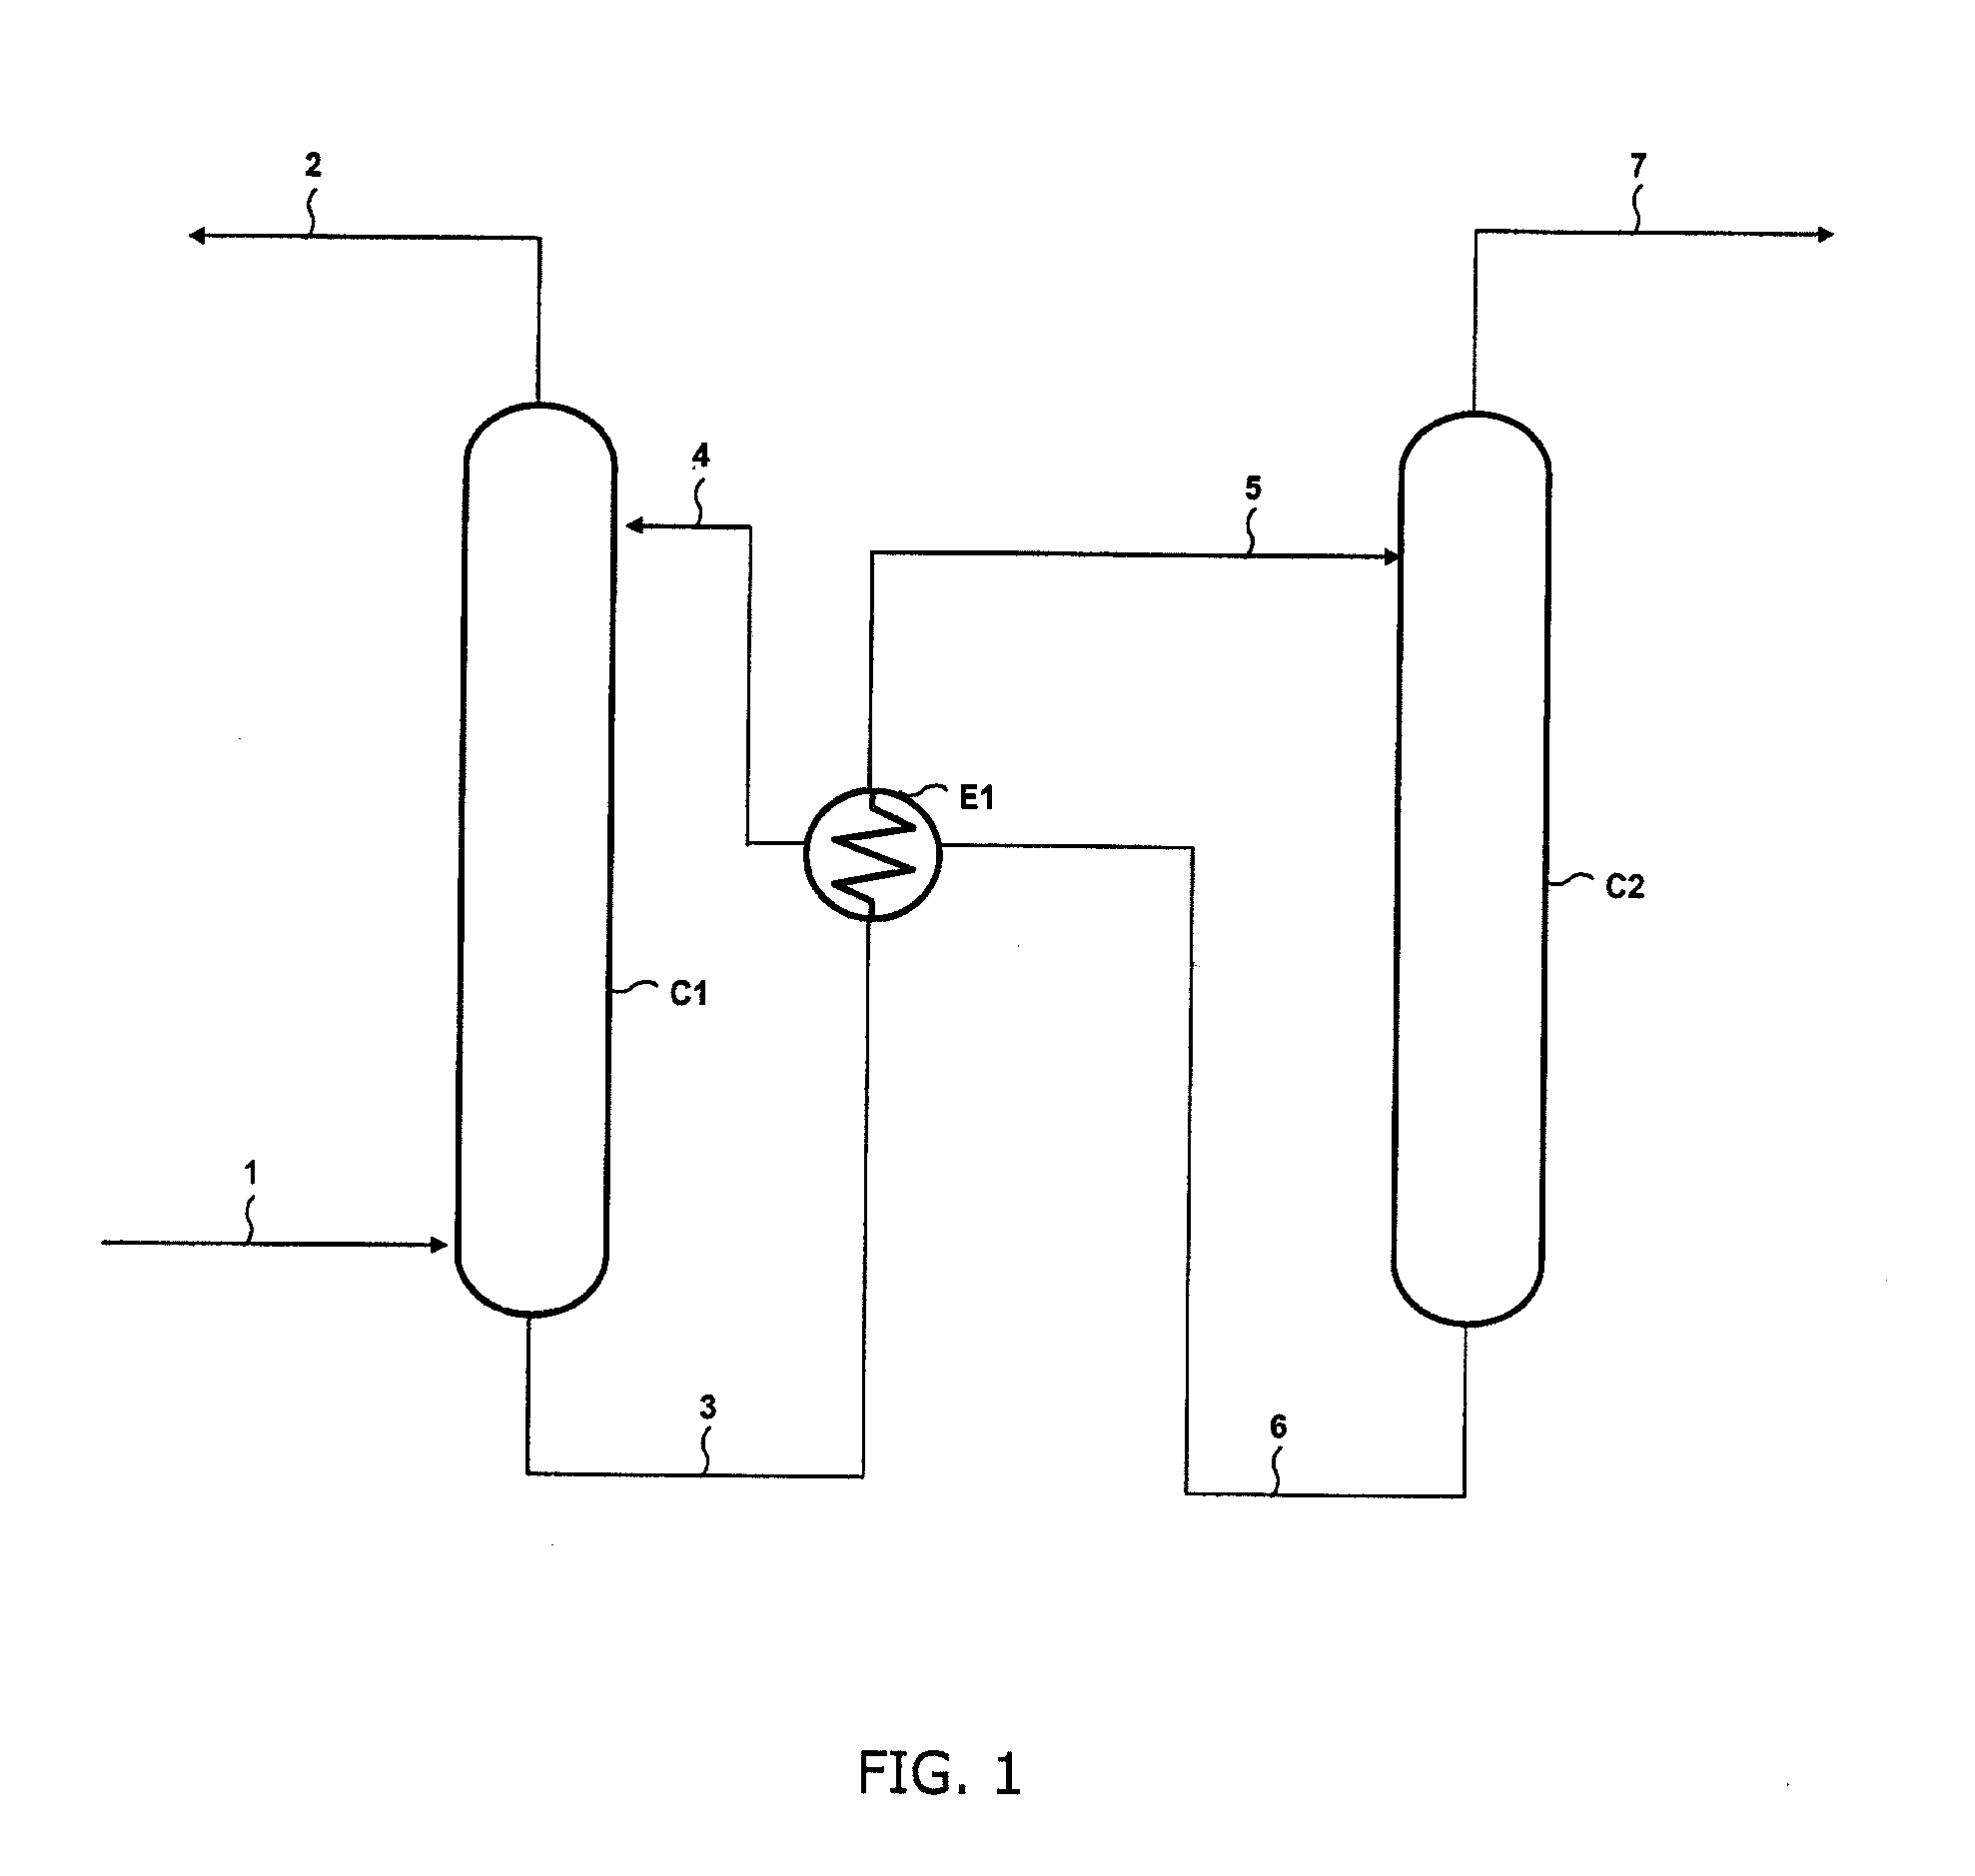 Method of removing acid compounds from a gaseous effluent with an absorbent solution based on i/ii/iii triamines